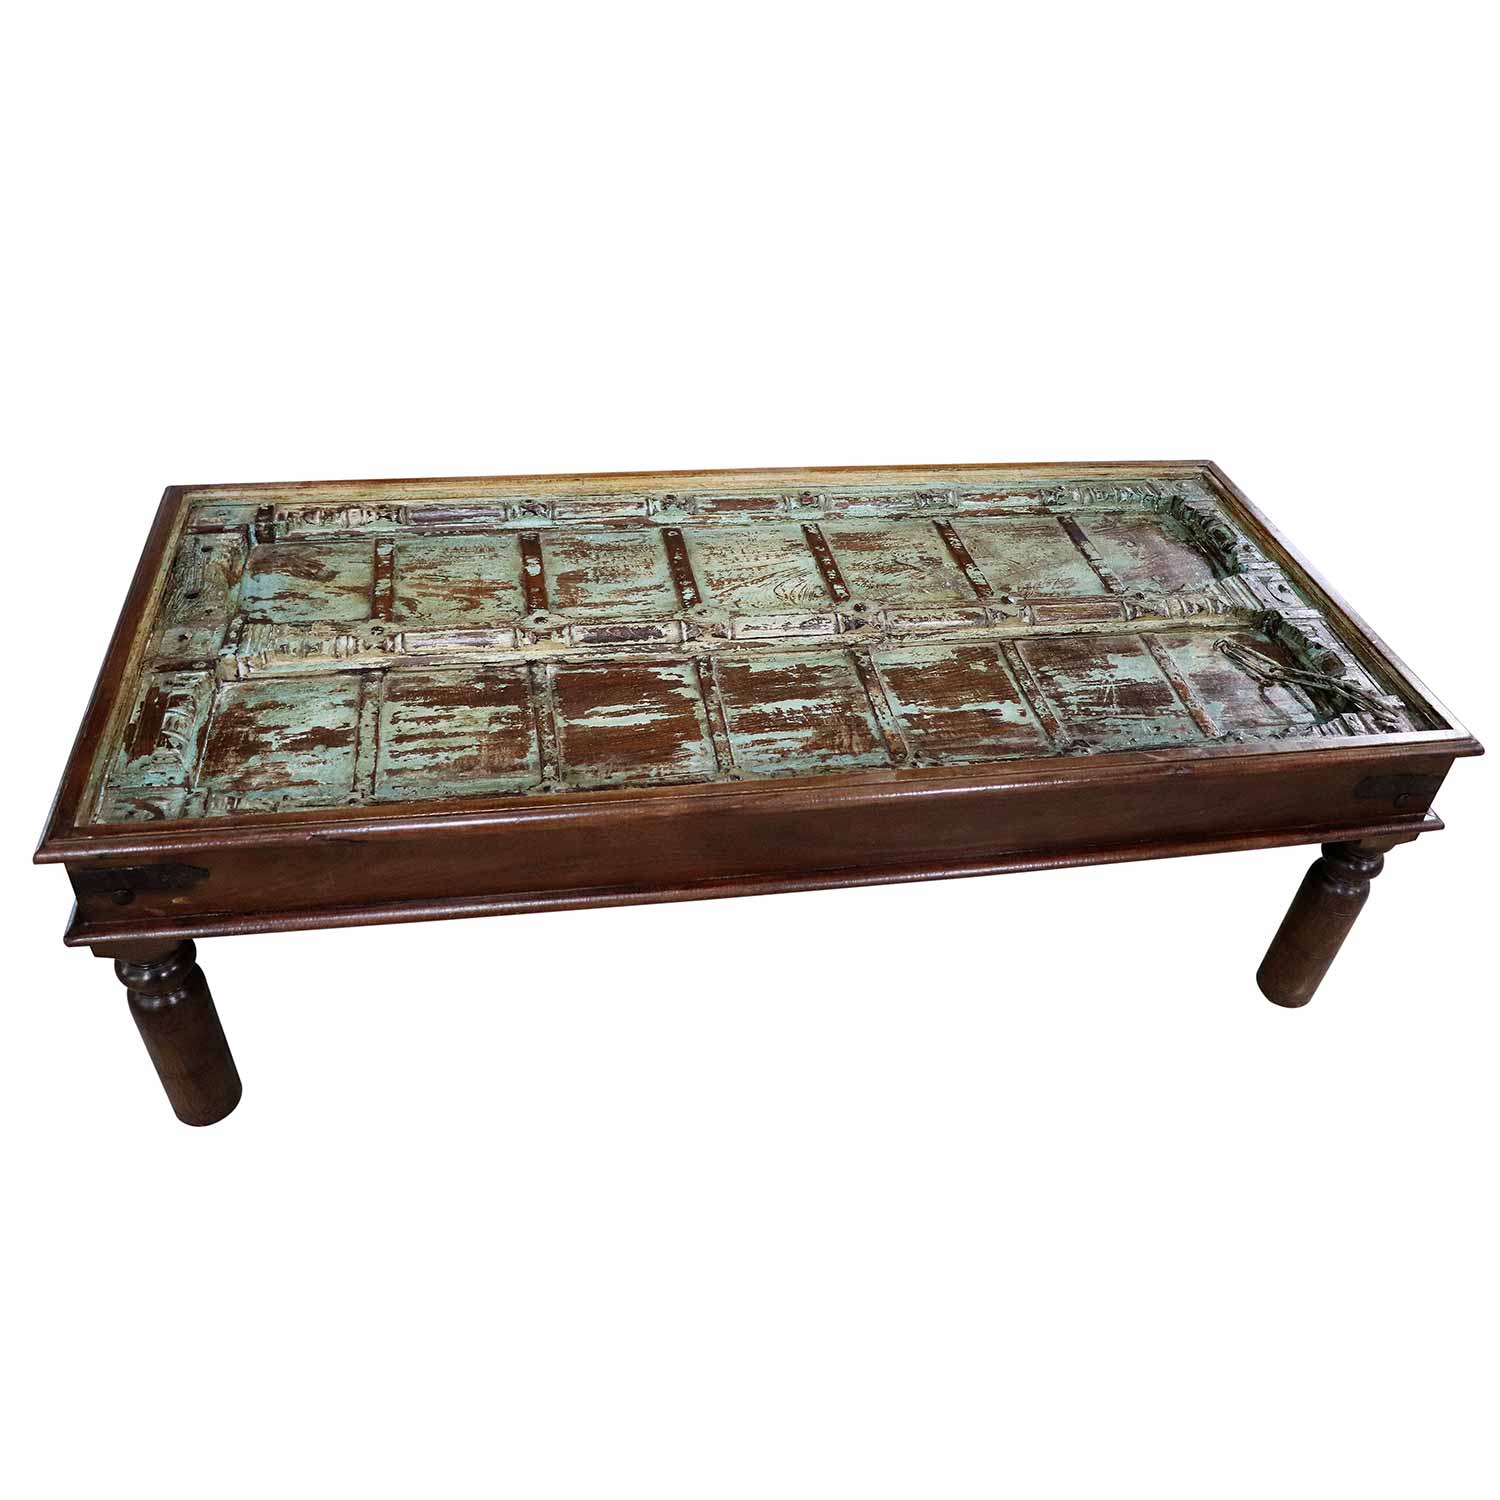 Coffee table Louis Vuitton trunk - Tables - Items by category - European  ANTIQUES & DECORATIVE